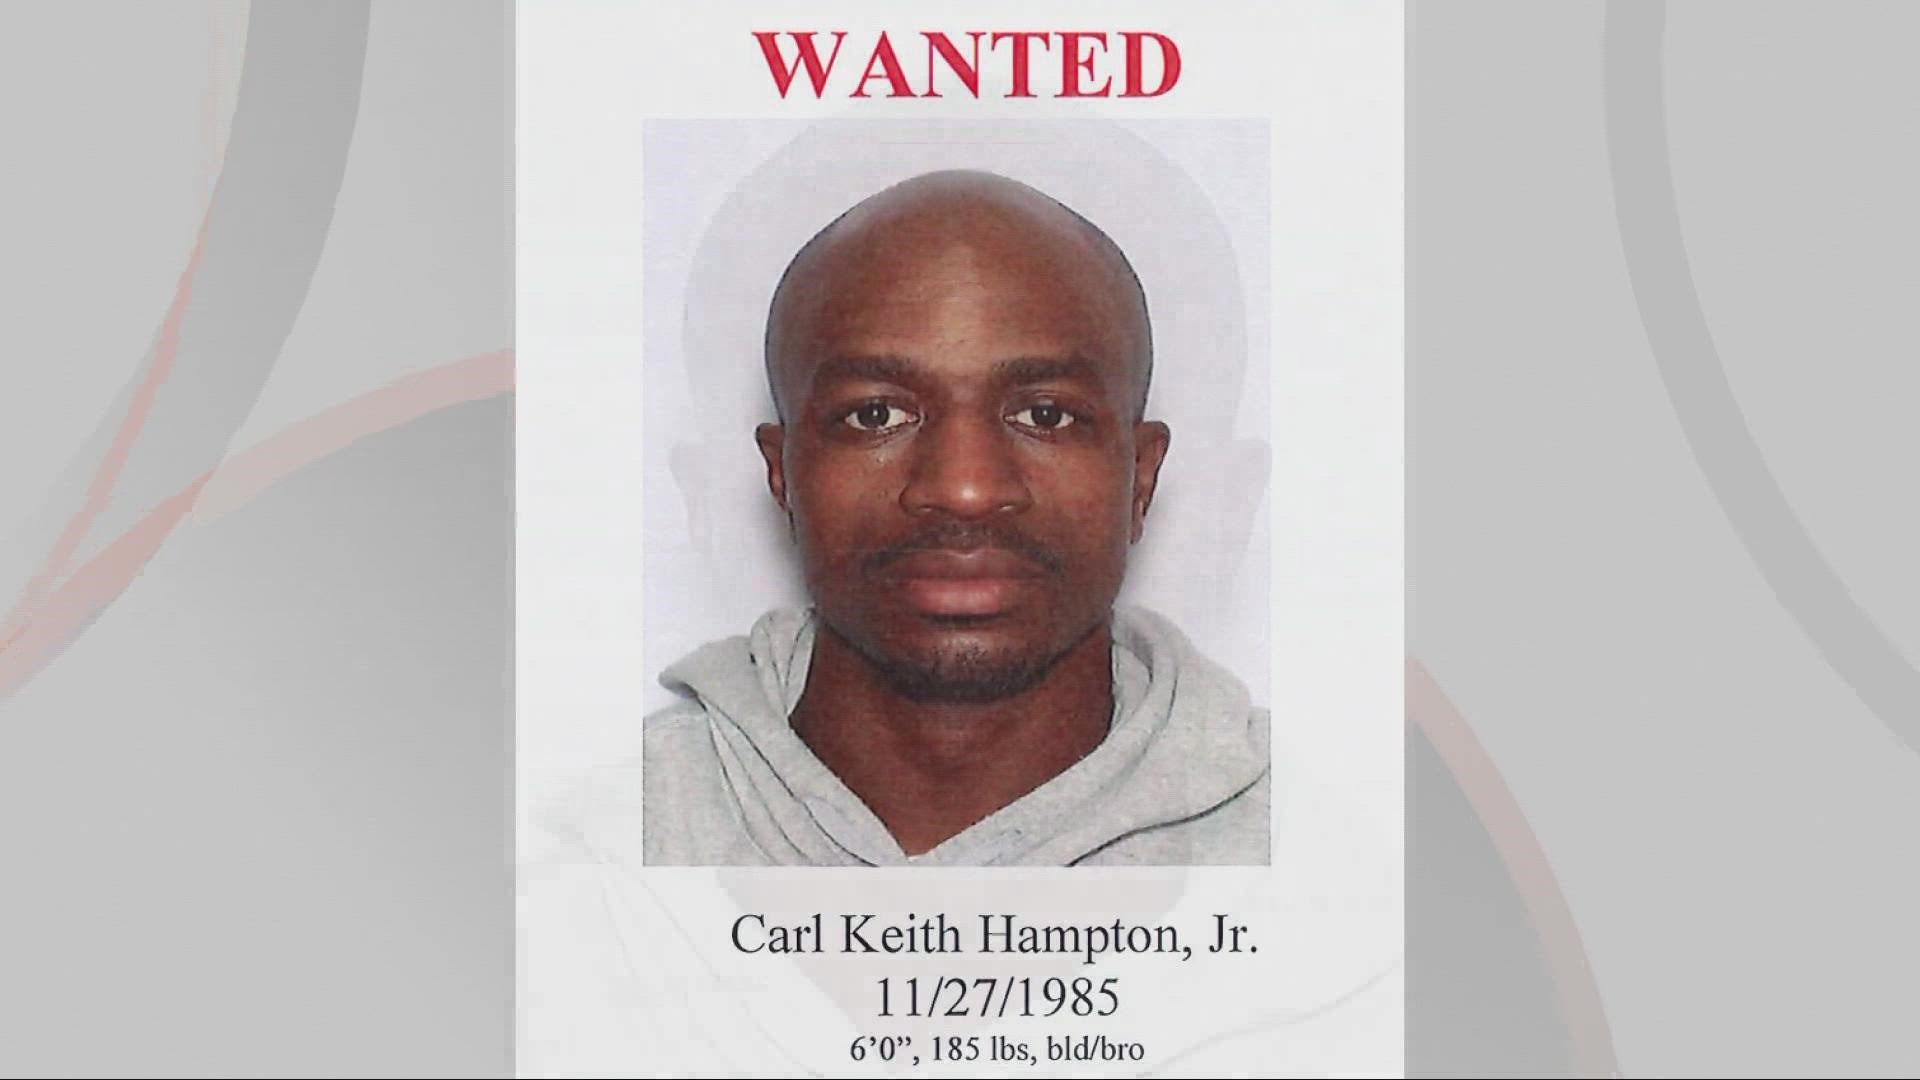 Carl Hampton is considered armed and dangerous. If you have any information on this case, please contact the South Euclid Police Department at 216-381-1234.